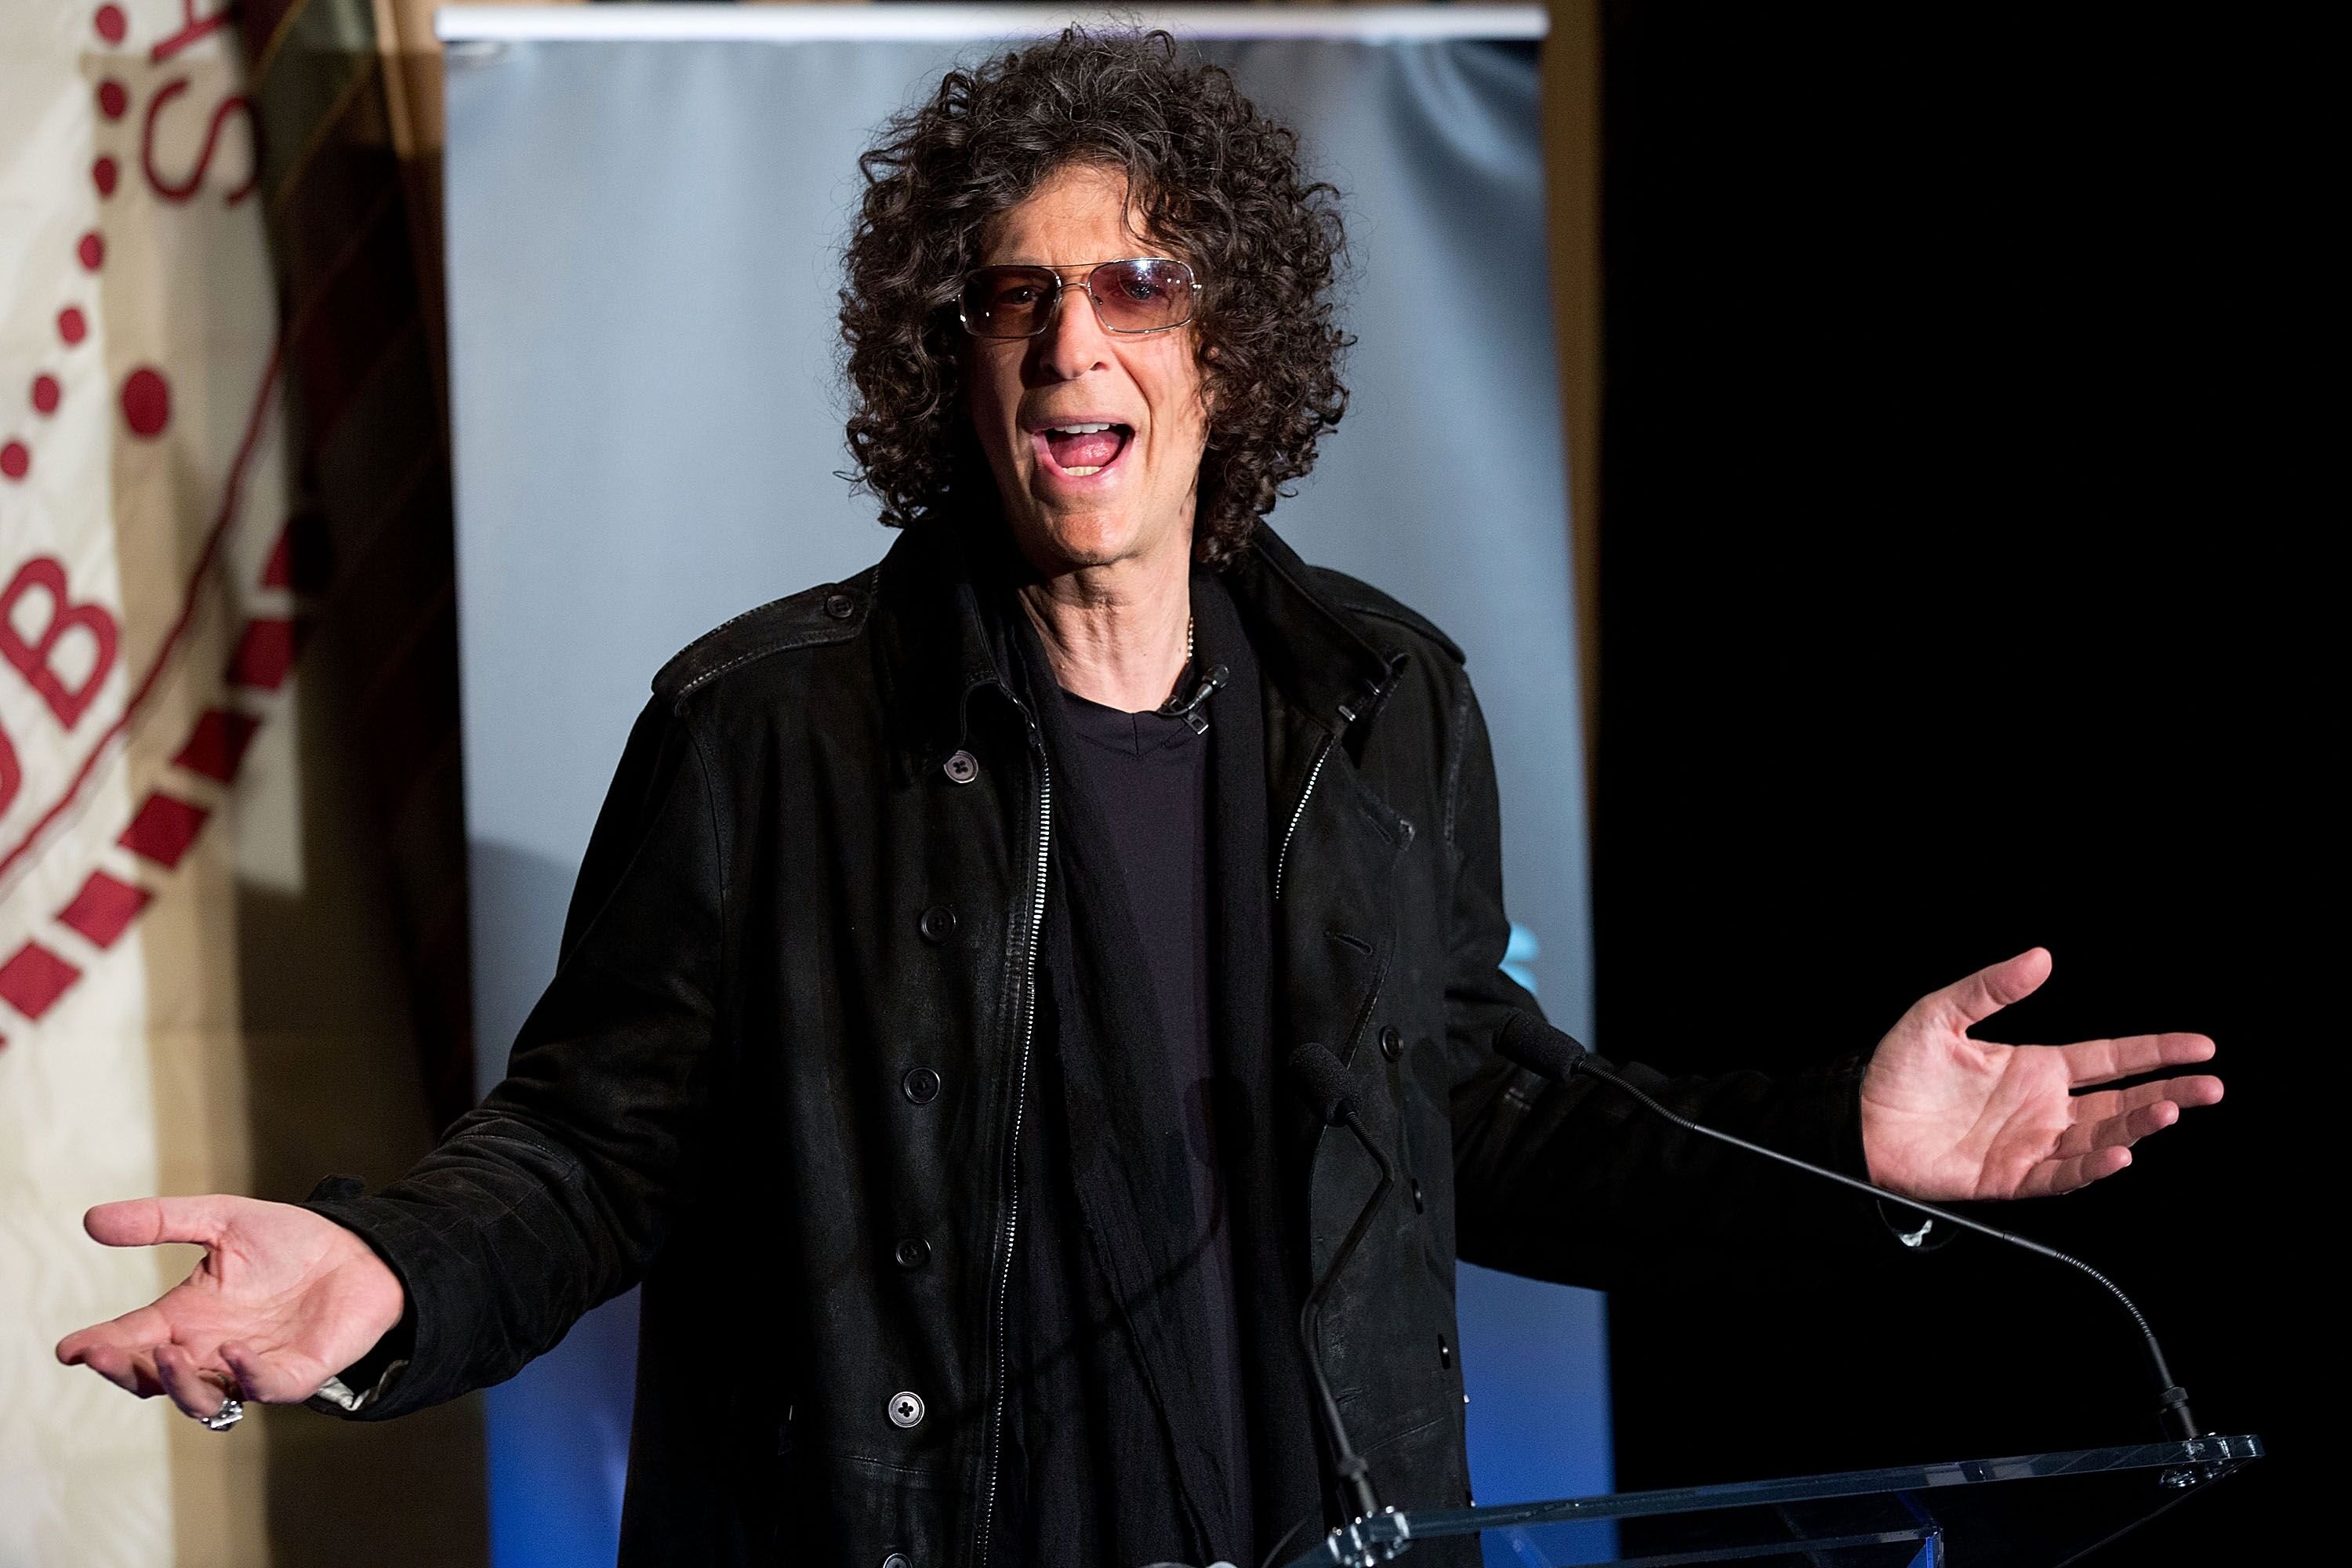 Radio personality Howard Stern/ Source: Getty Images